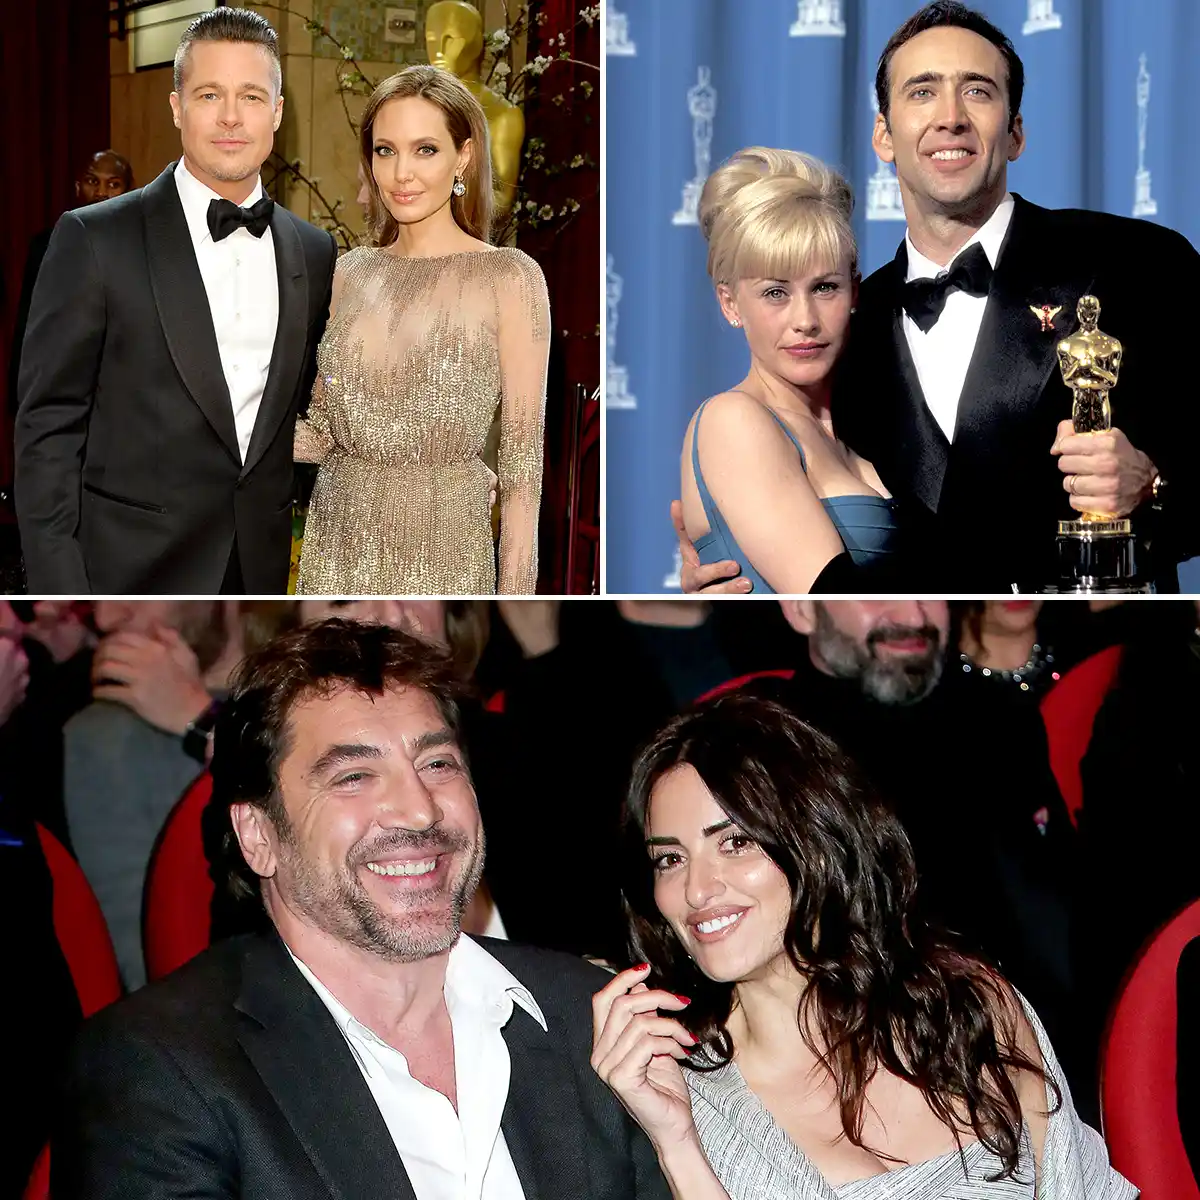 Who is the only Oscar winner whose parents were also both oscar winners?